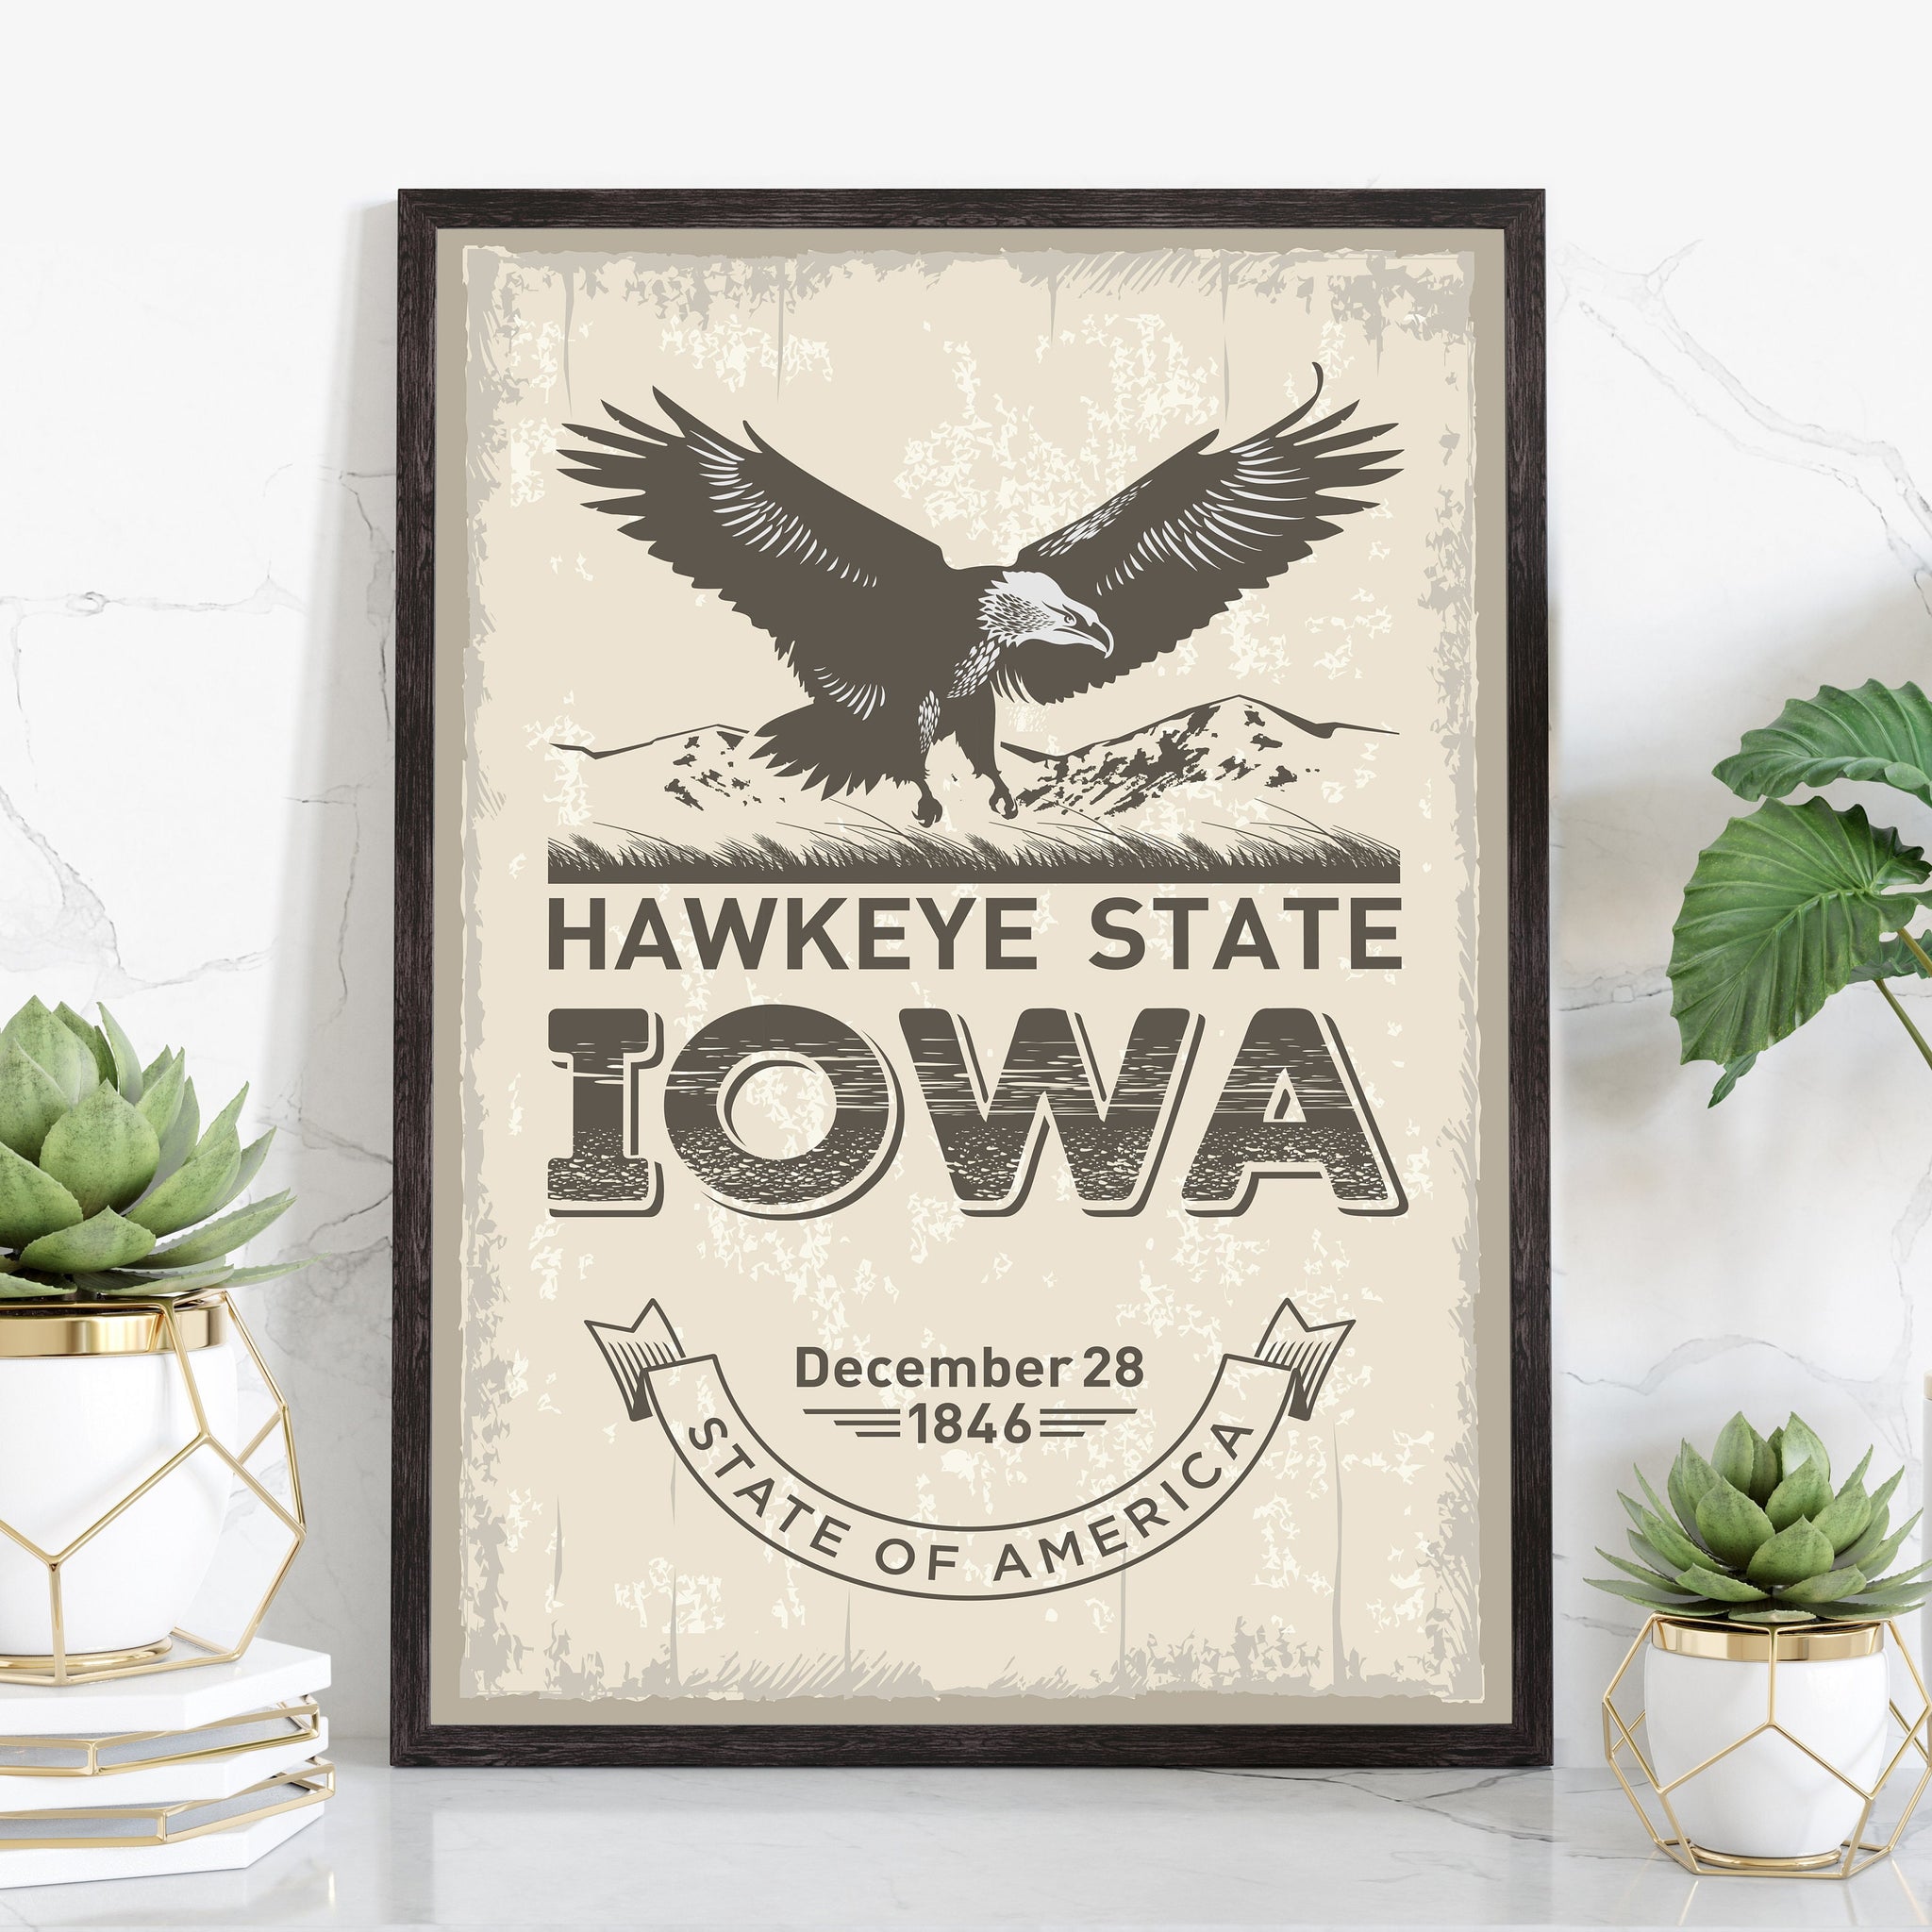 Iowa State Symbol Poster, Iowa State Poster Print, Iowa State Emblem Poster, Retro Travel State Poster, Home and Office Wall Art